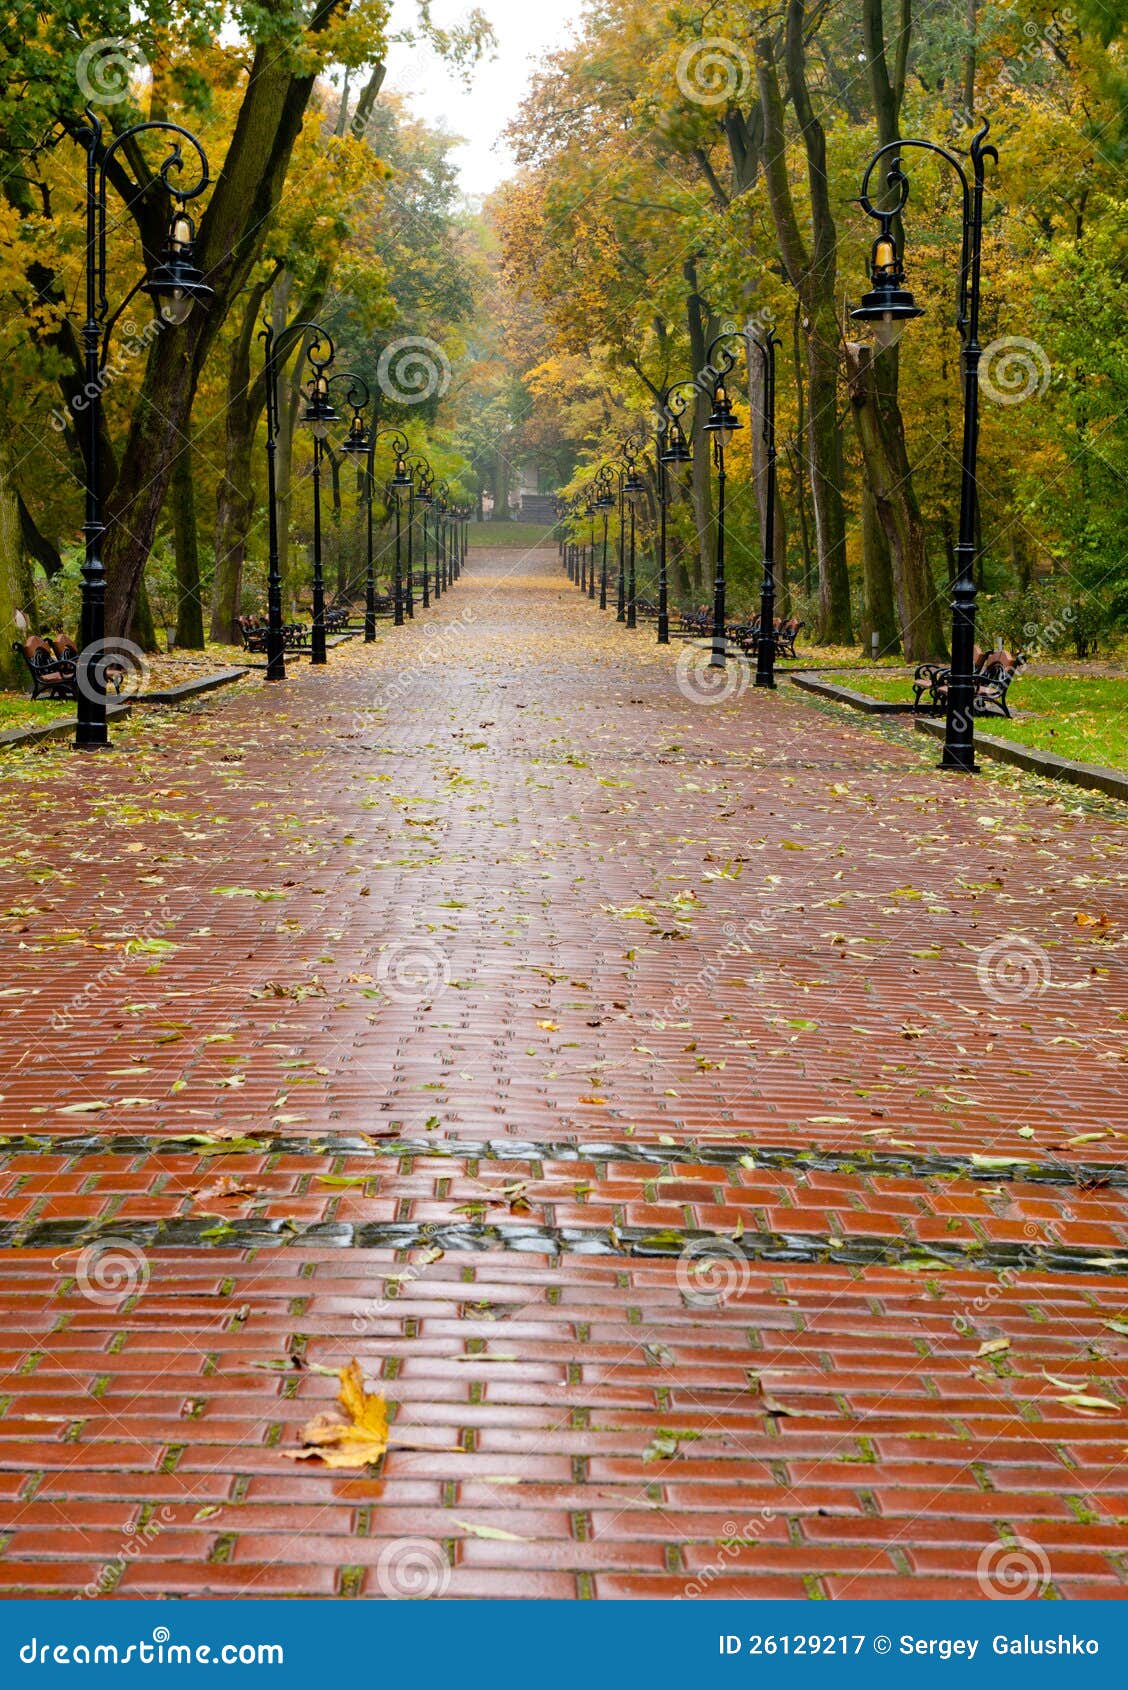 alleyway with paved road to autumn park